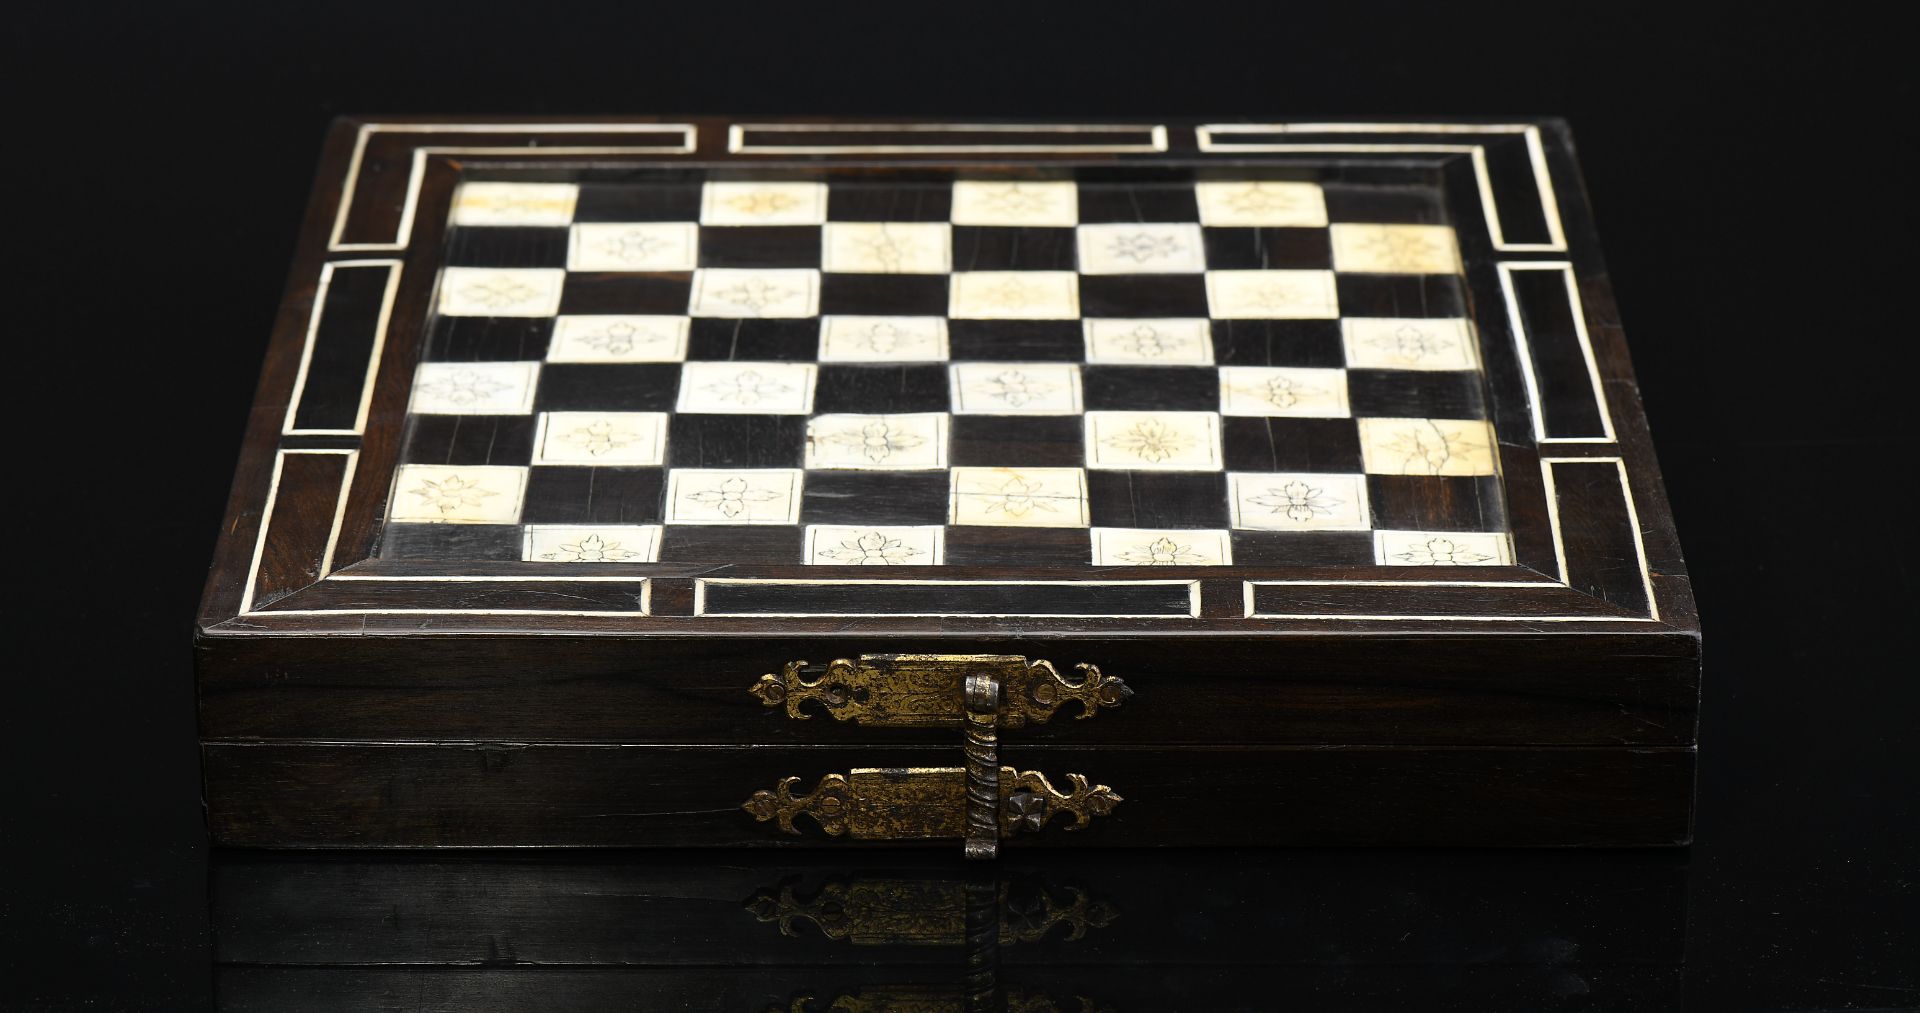 Chess, Backgammon and Nine Men’s Morris (Mill game) board articulated and closing in the shape of a  - Image 9 of 9